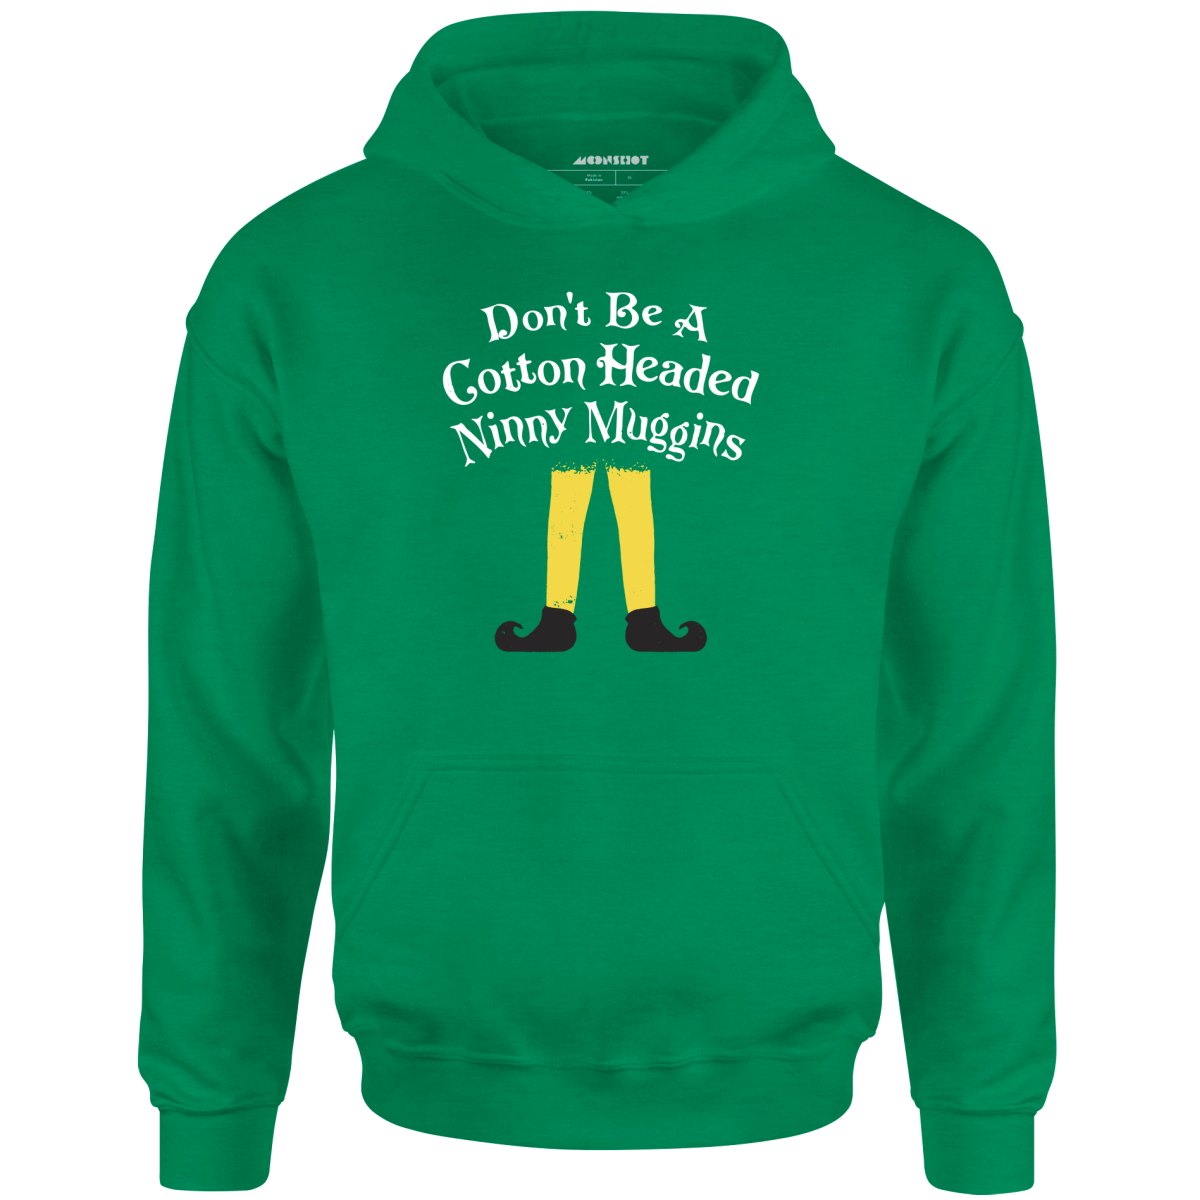 Don't Be a Cotton Headed Ninny Muggins - Unisex Hoodie